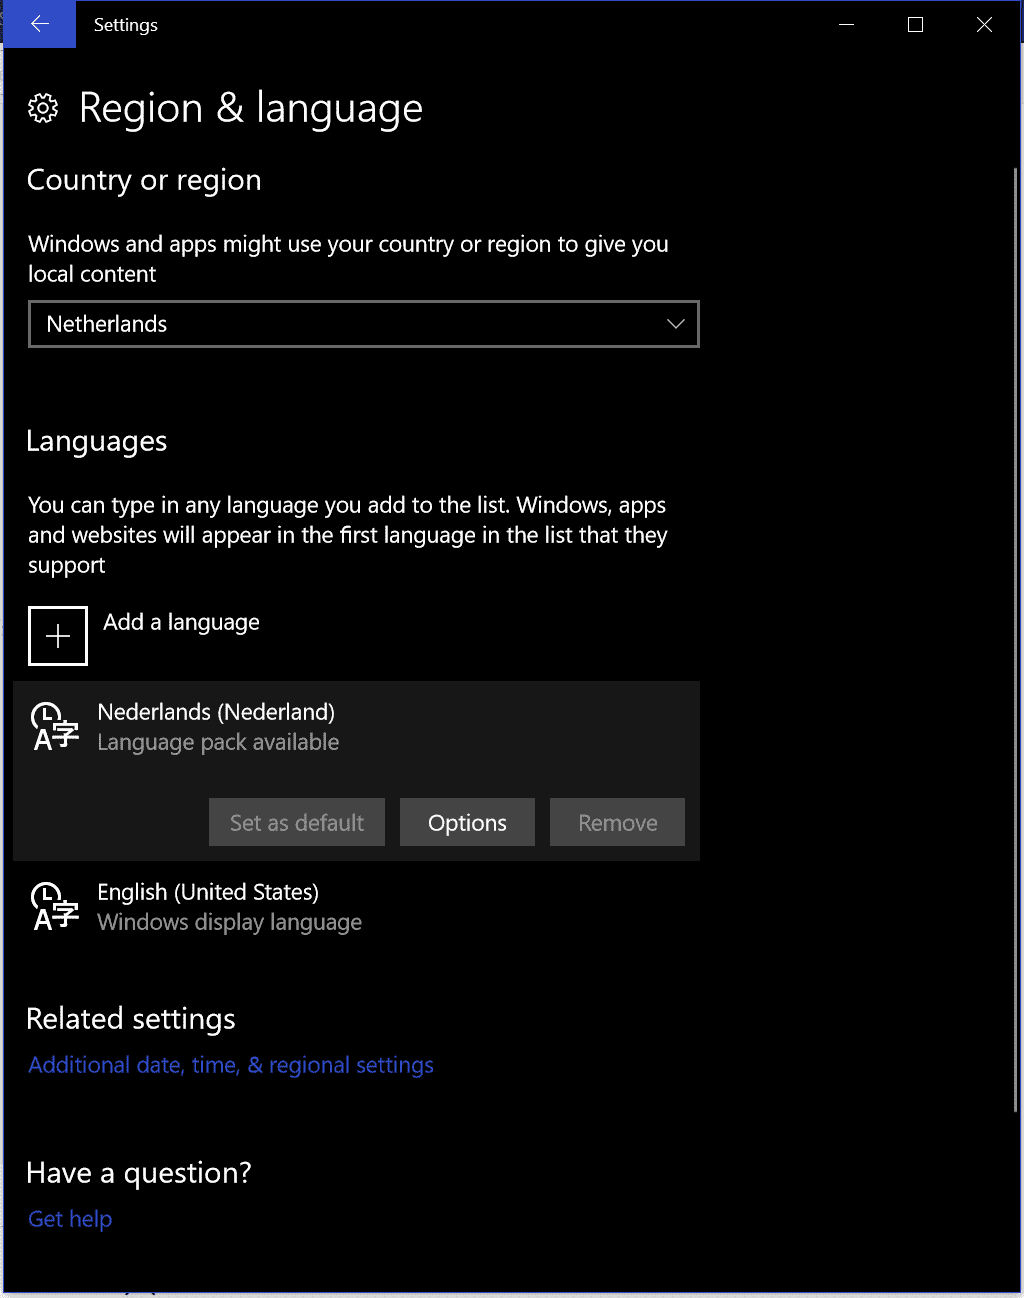 Problems installing language pack on Windows 10 1358a533-faff-4db2-a817-e7dee22816ab?upload=true.png